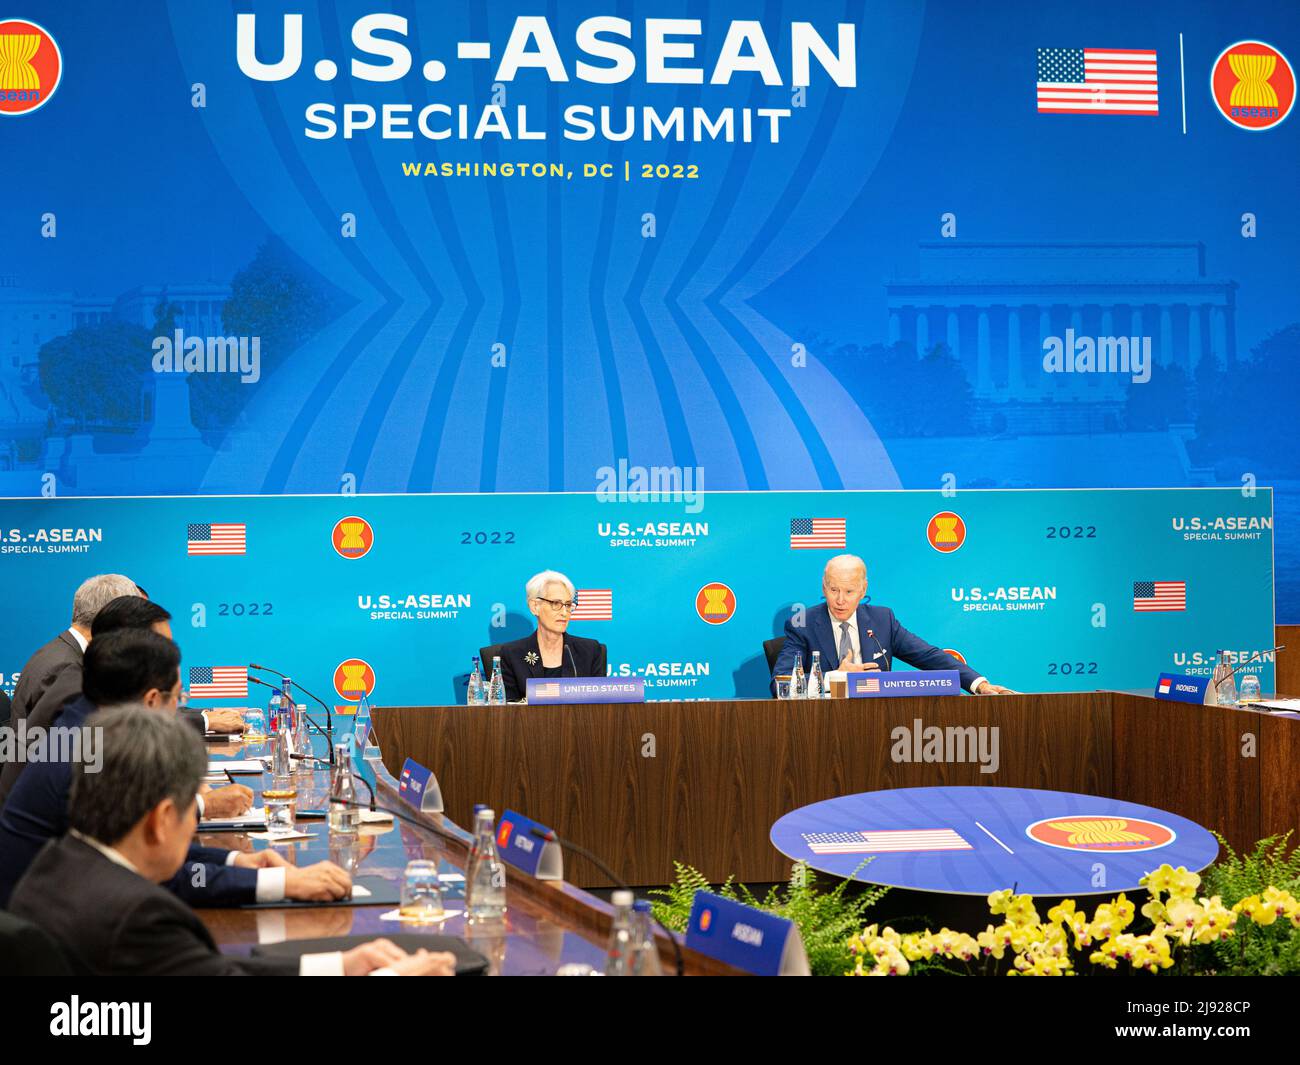 Washington, United States of America. 13 May, 2022. U.S President Joe Biden, right, and Deputy Secretary of State Wendy Sherman, center, during the opening session of the U.S. - ASEAN Special Summit at the Department of State, May 13, 2022 in Washington, D.C.  Credit: Freddie Everett/U.S. State Department/Alamy Live News Stock Photo